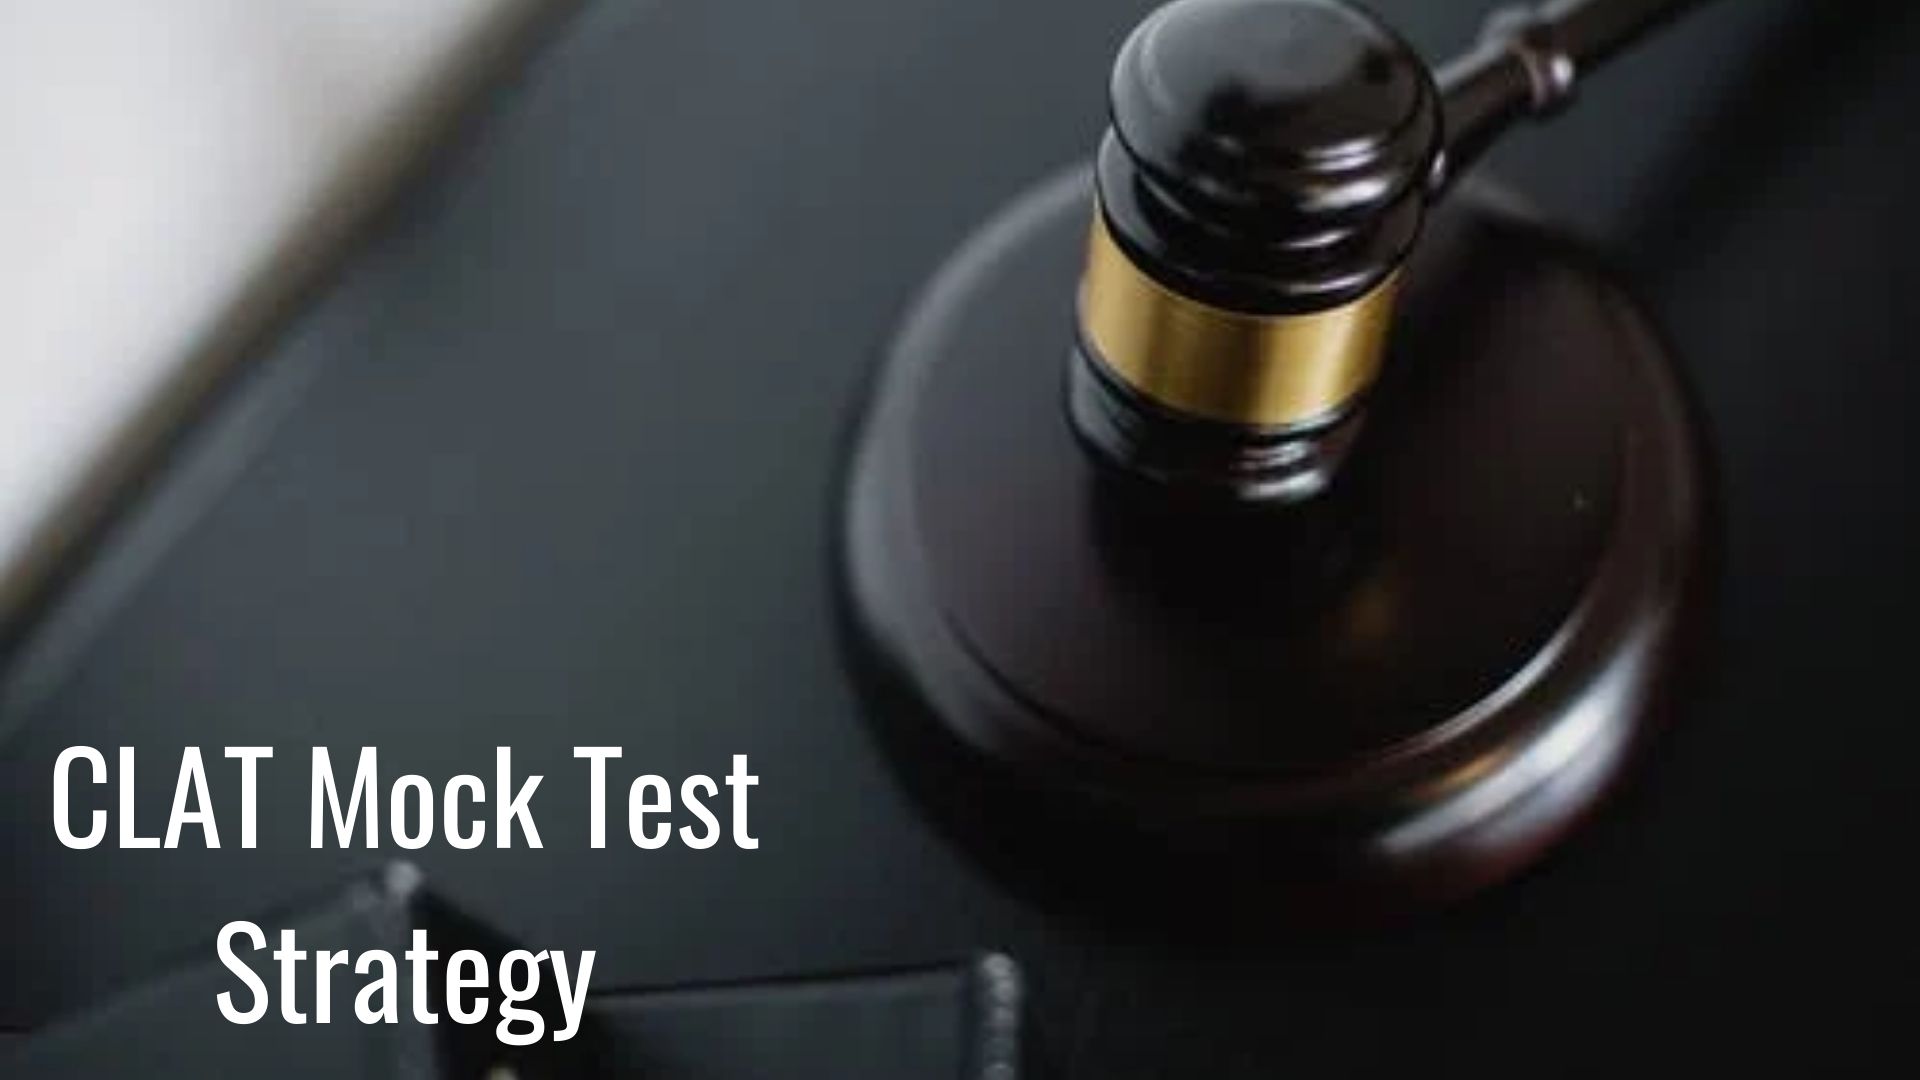 What strategy I must follow in my CLAT Mock Test to get good marks?